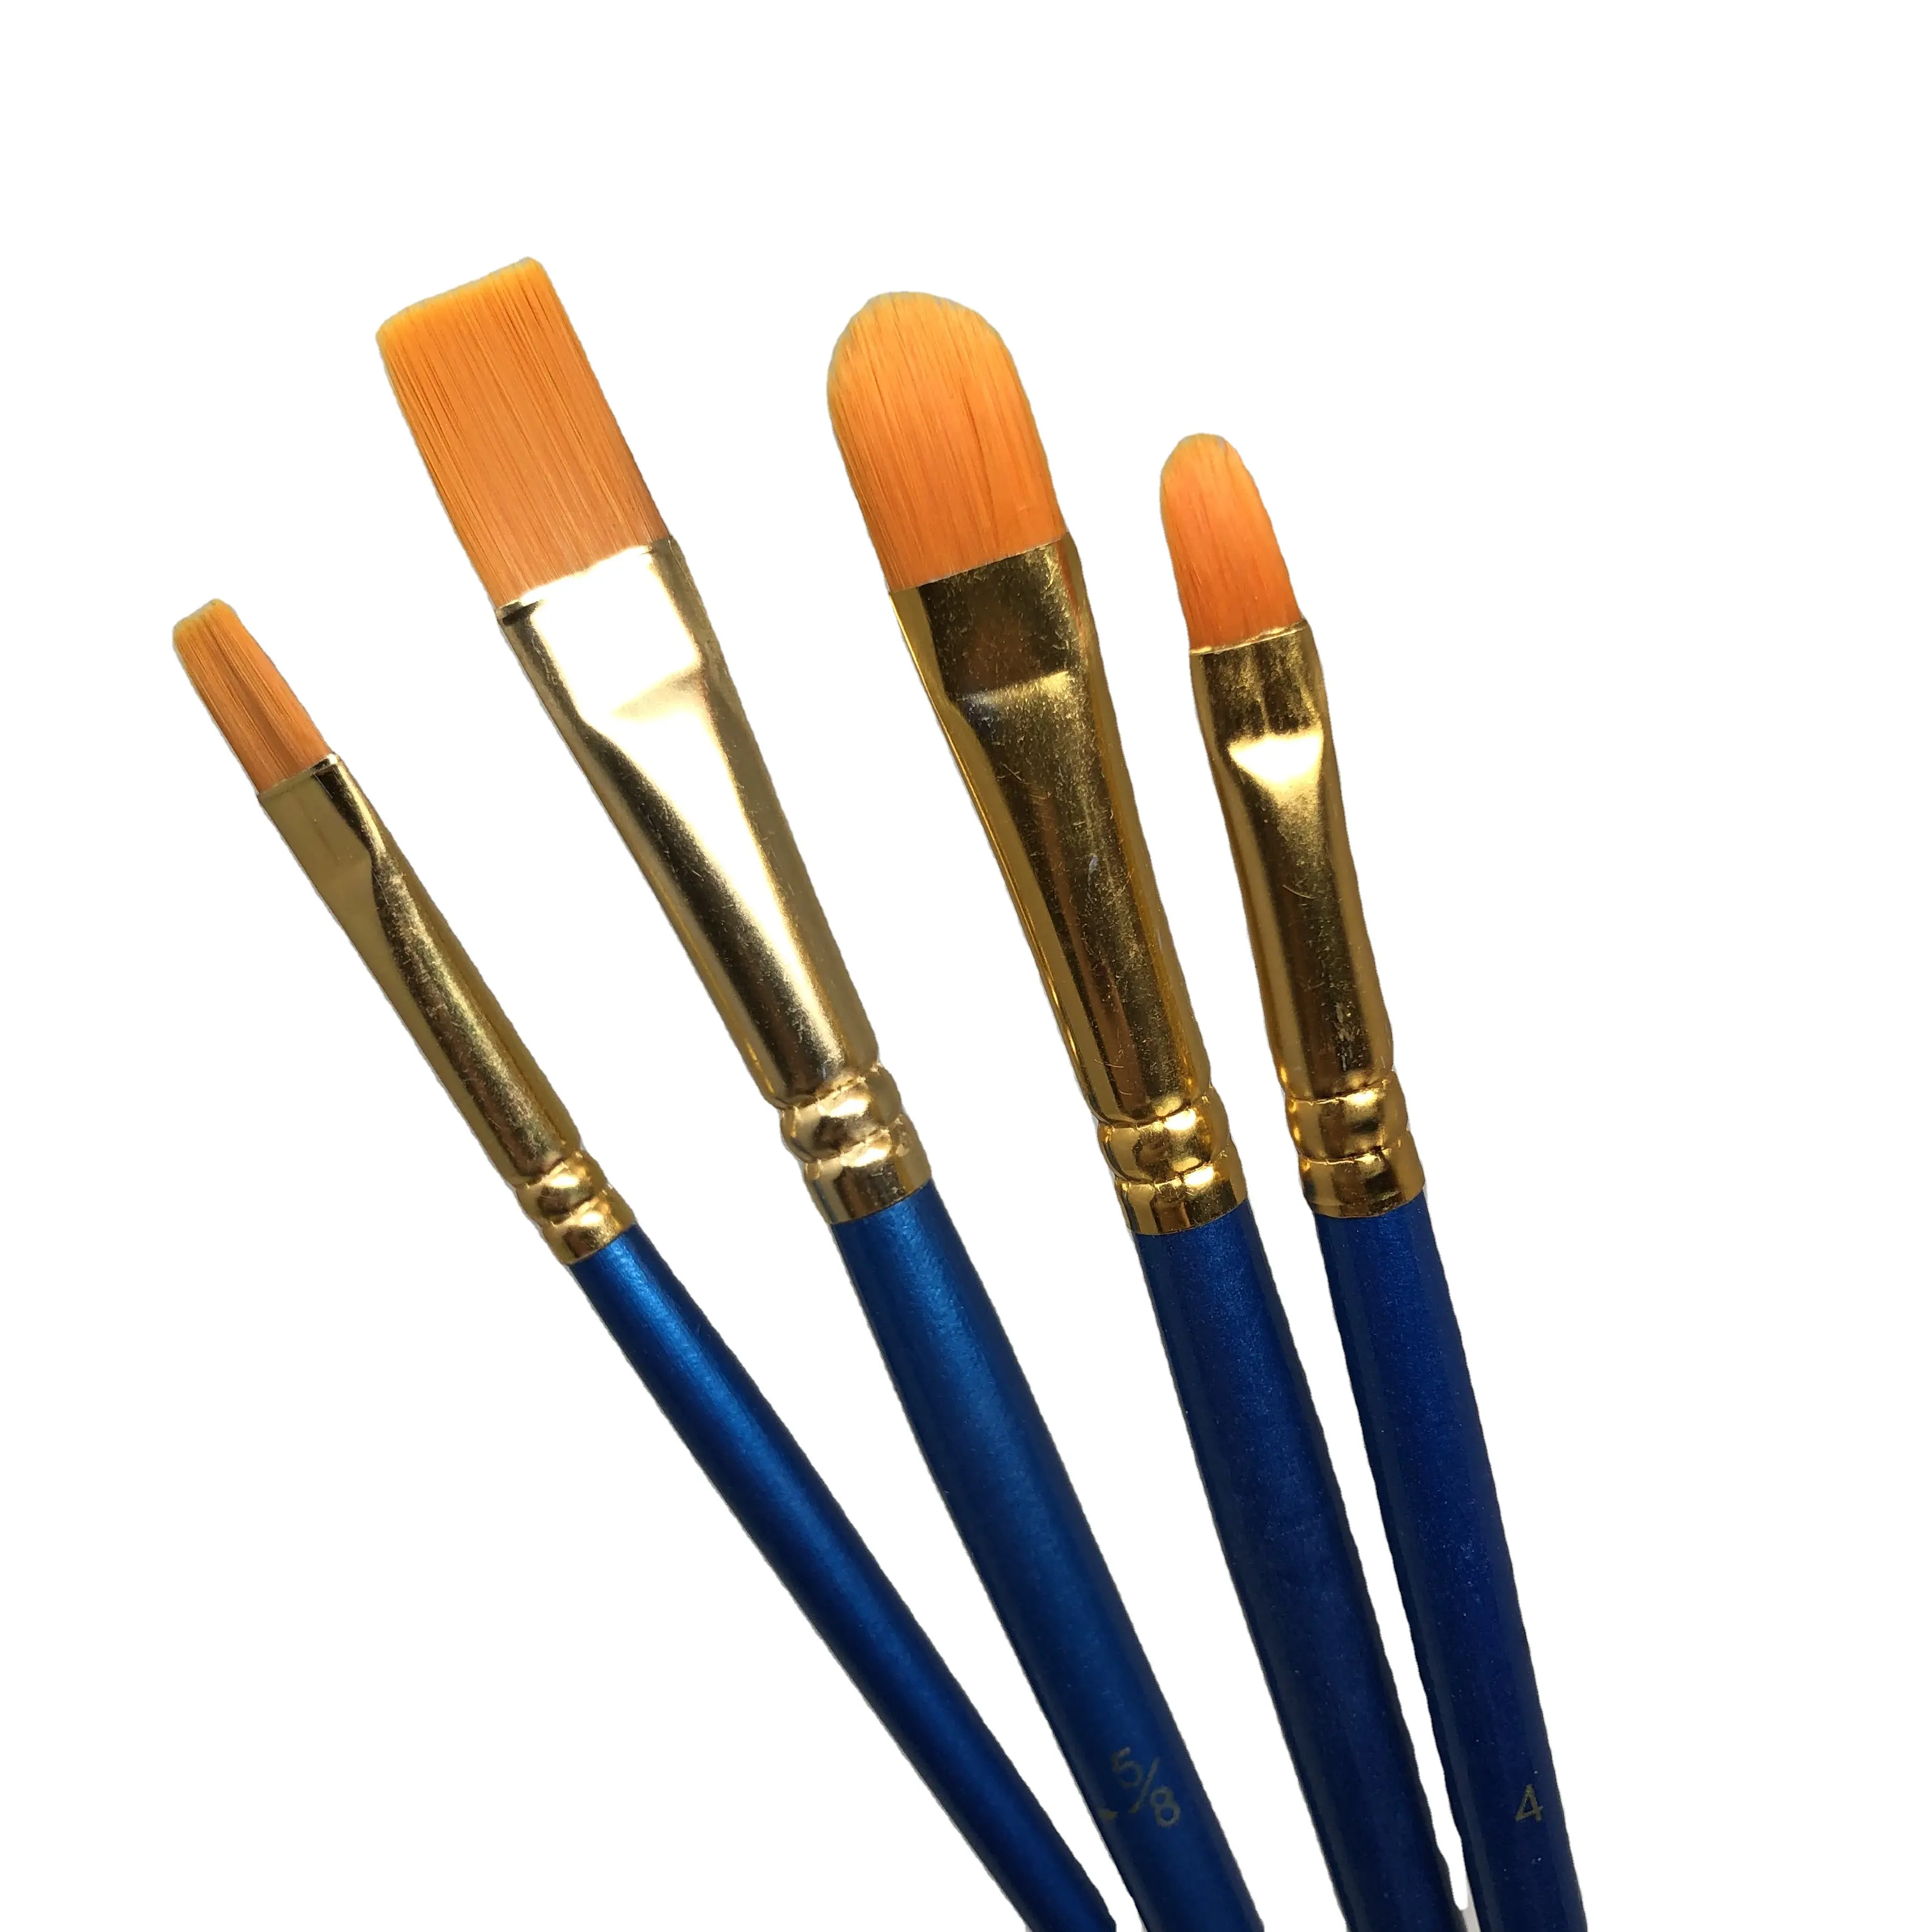 New Hot Selling Artist Paint Brush Water Color Calligraphy Drawing Tool 10pcs